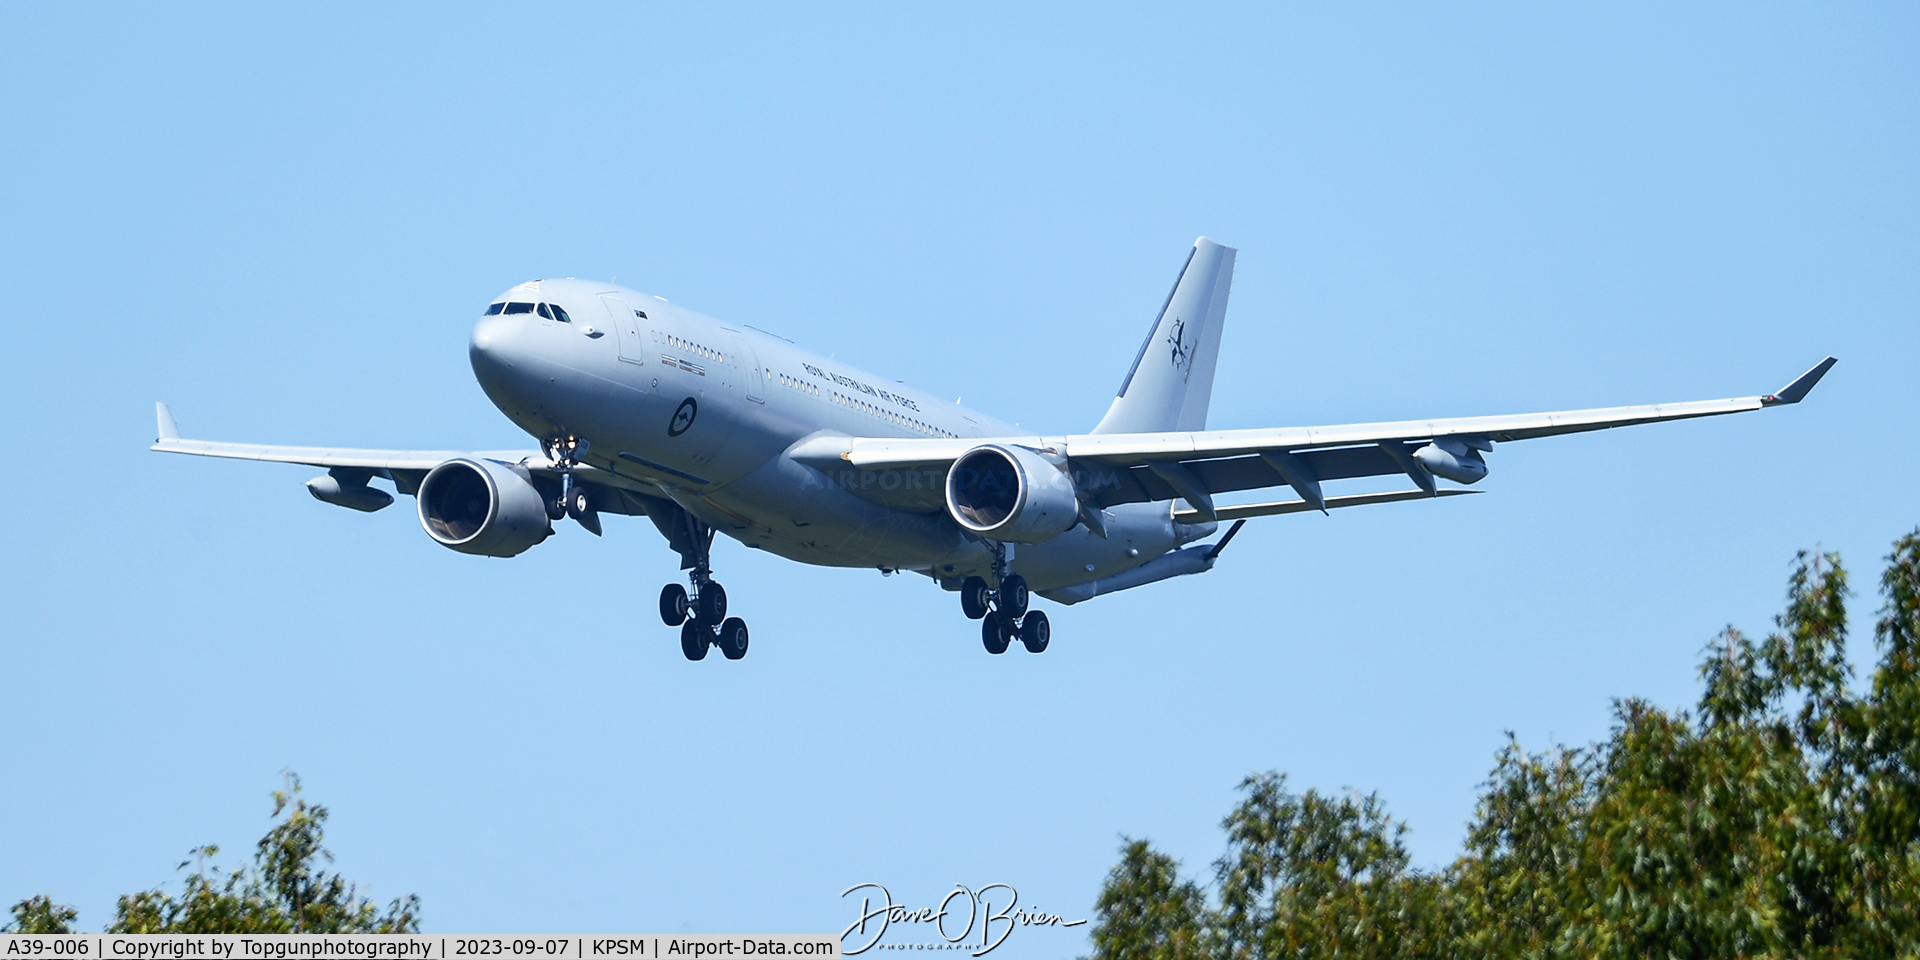 A39-006, 2008 Airbus A330-203/MRTT C/N 892, AUSSIE540 coming in all the way from RAAF Base Amberley